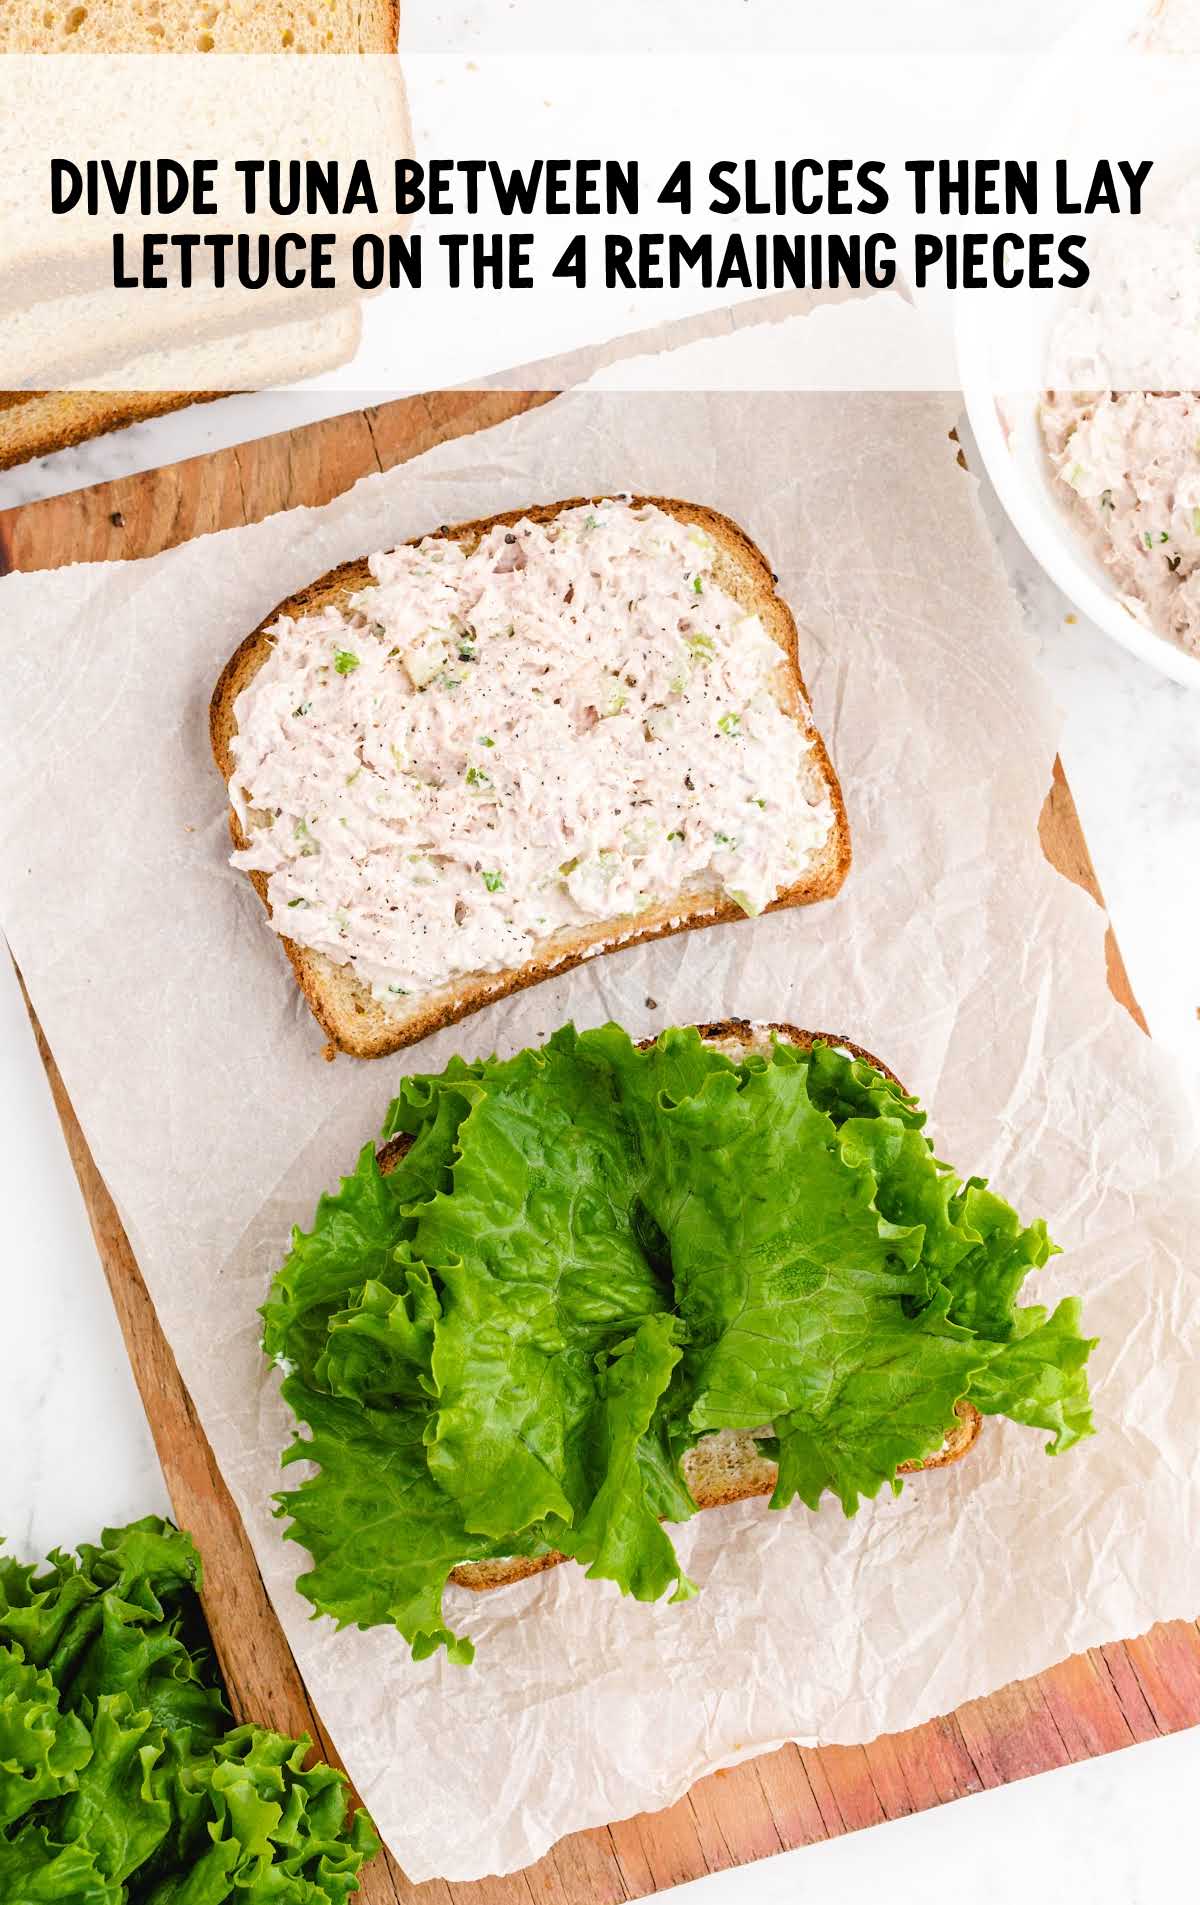 tuna and lettuce layered on the bread